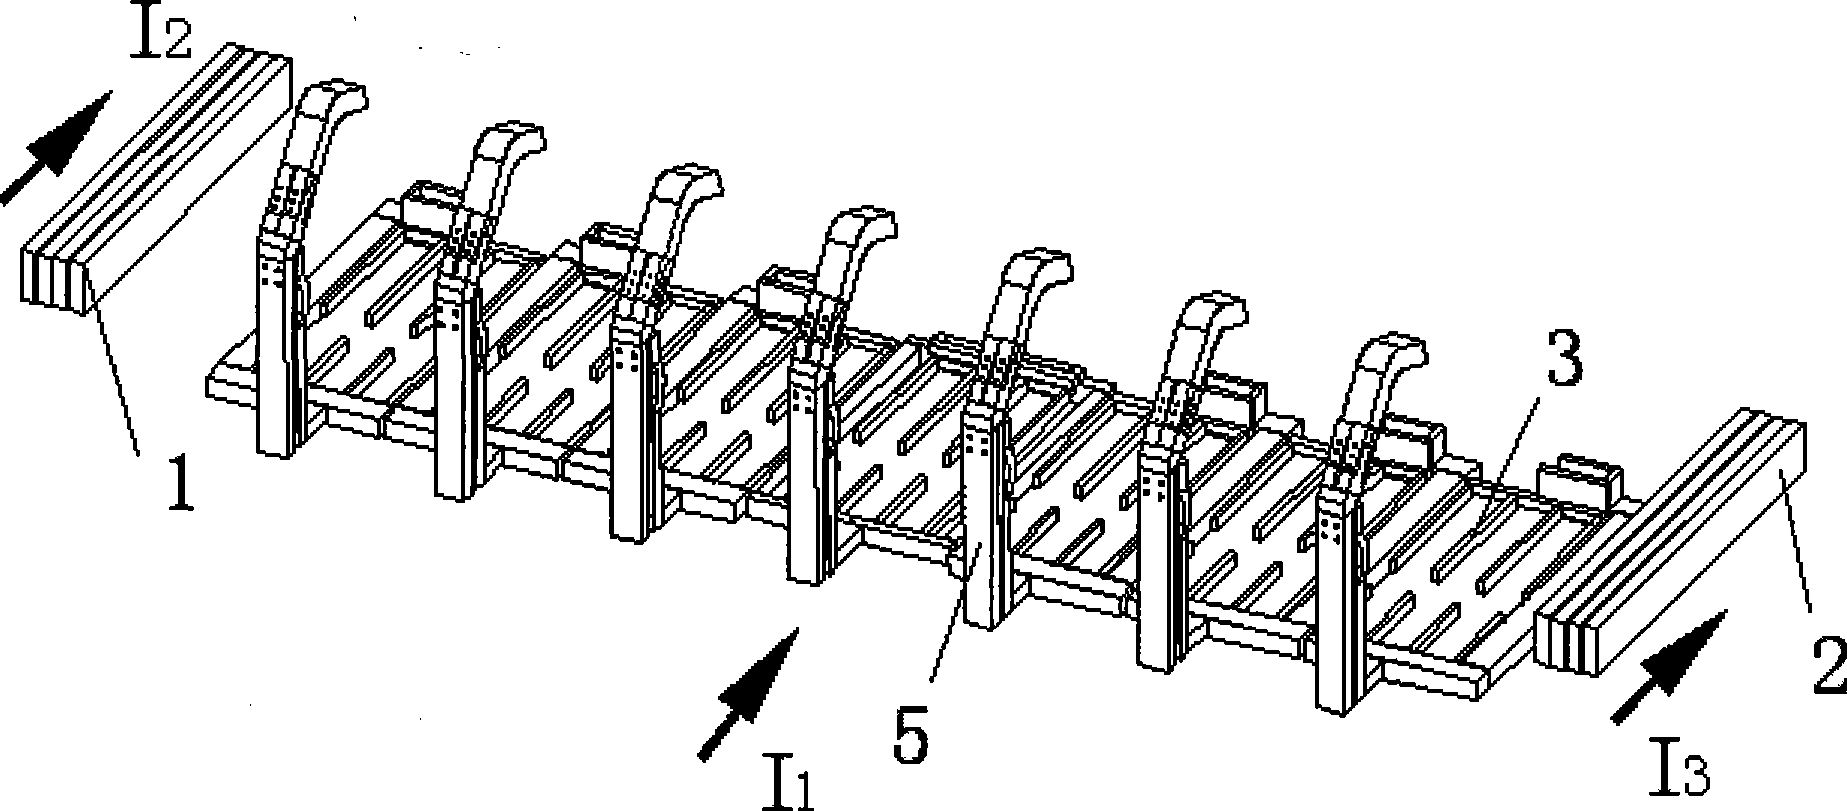 Aluminum cell bus-bar compensation structure with outlet at cell bottom